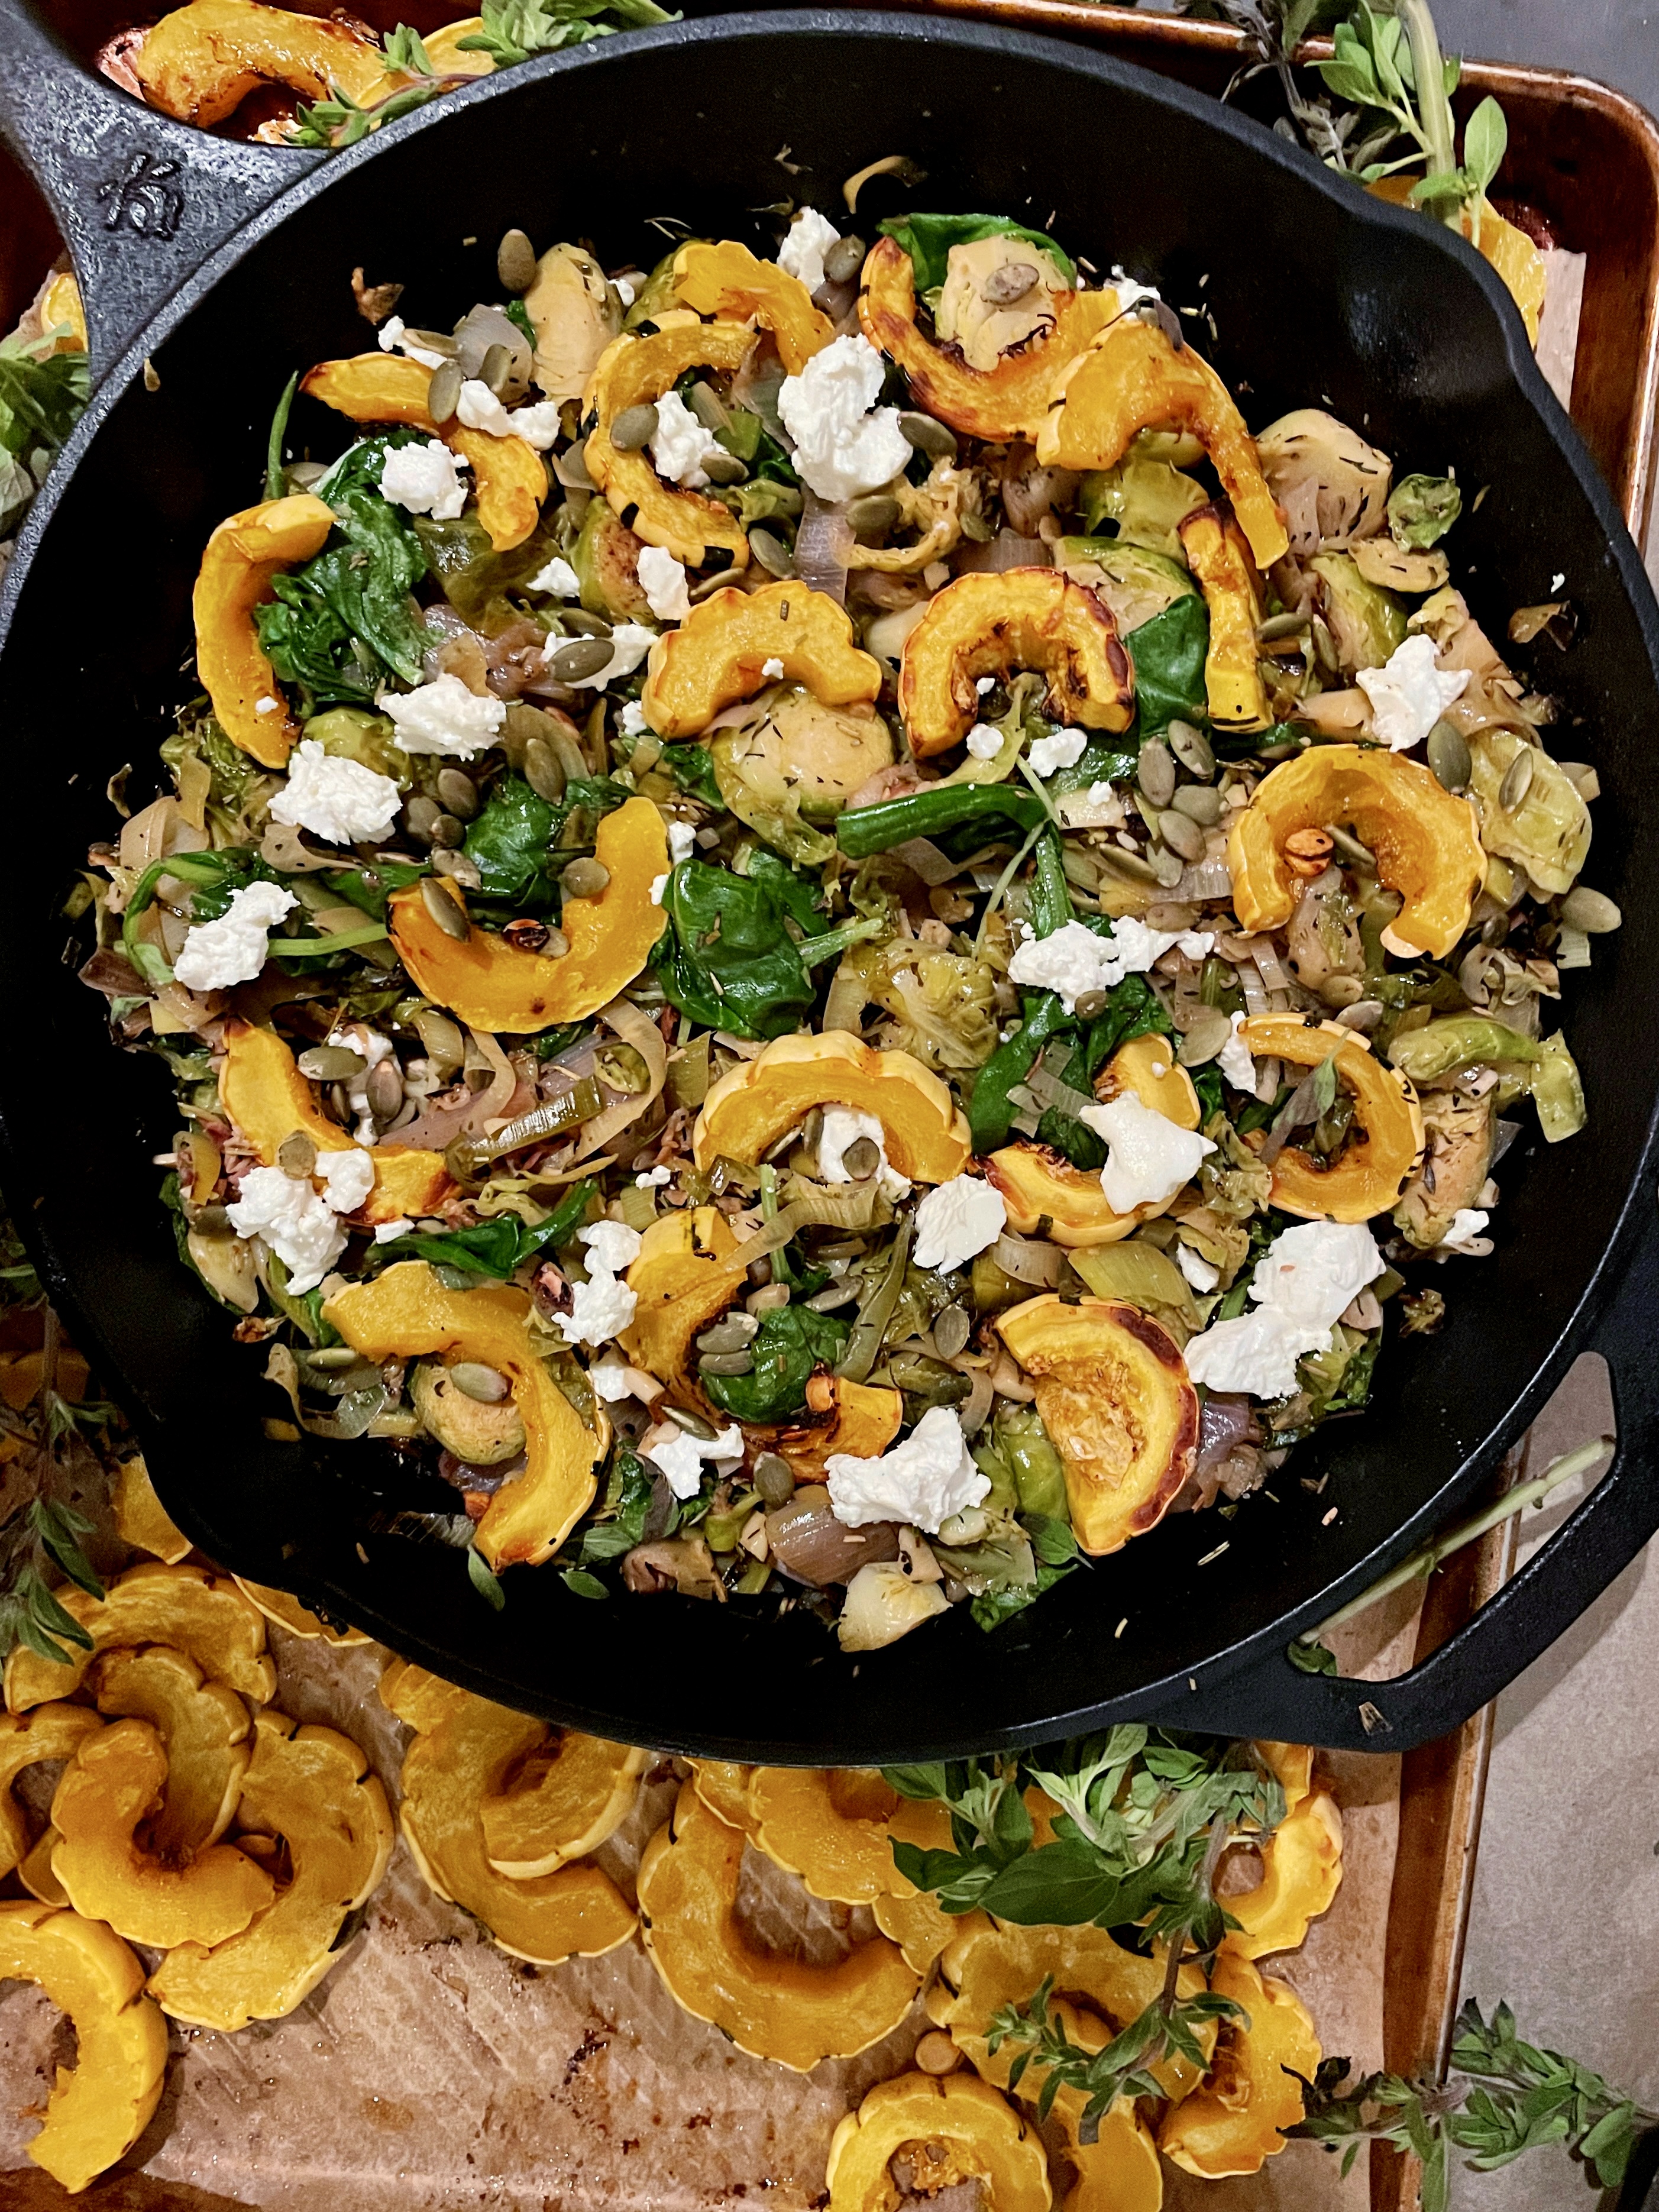 Perfectly charred roasted delicata squash with white wine apple cider wilted brussels sprouts and leeks all tossed up with some tuscan kale, creamy goat cheese, and crunchy pumpkin seeds: this Herbed Brussels, Leeks, and Roasted Delicata Squash Hash is my favorite way to use up all those fall veggies!!